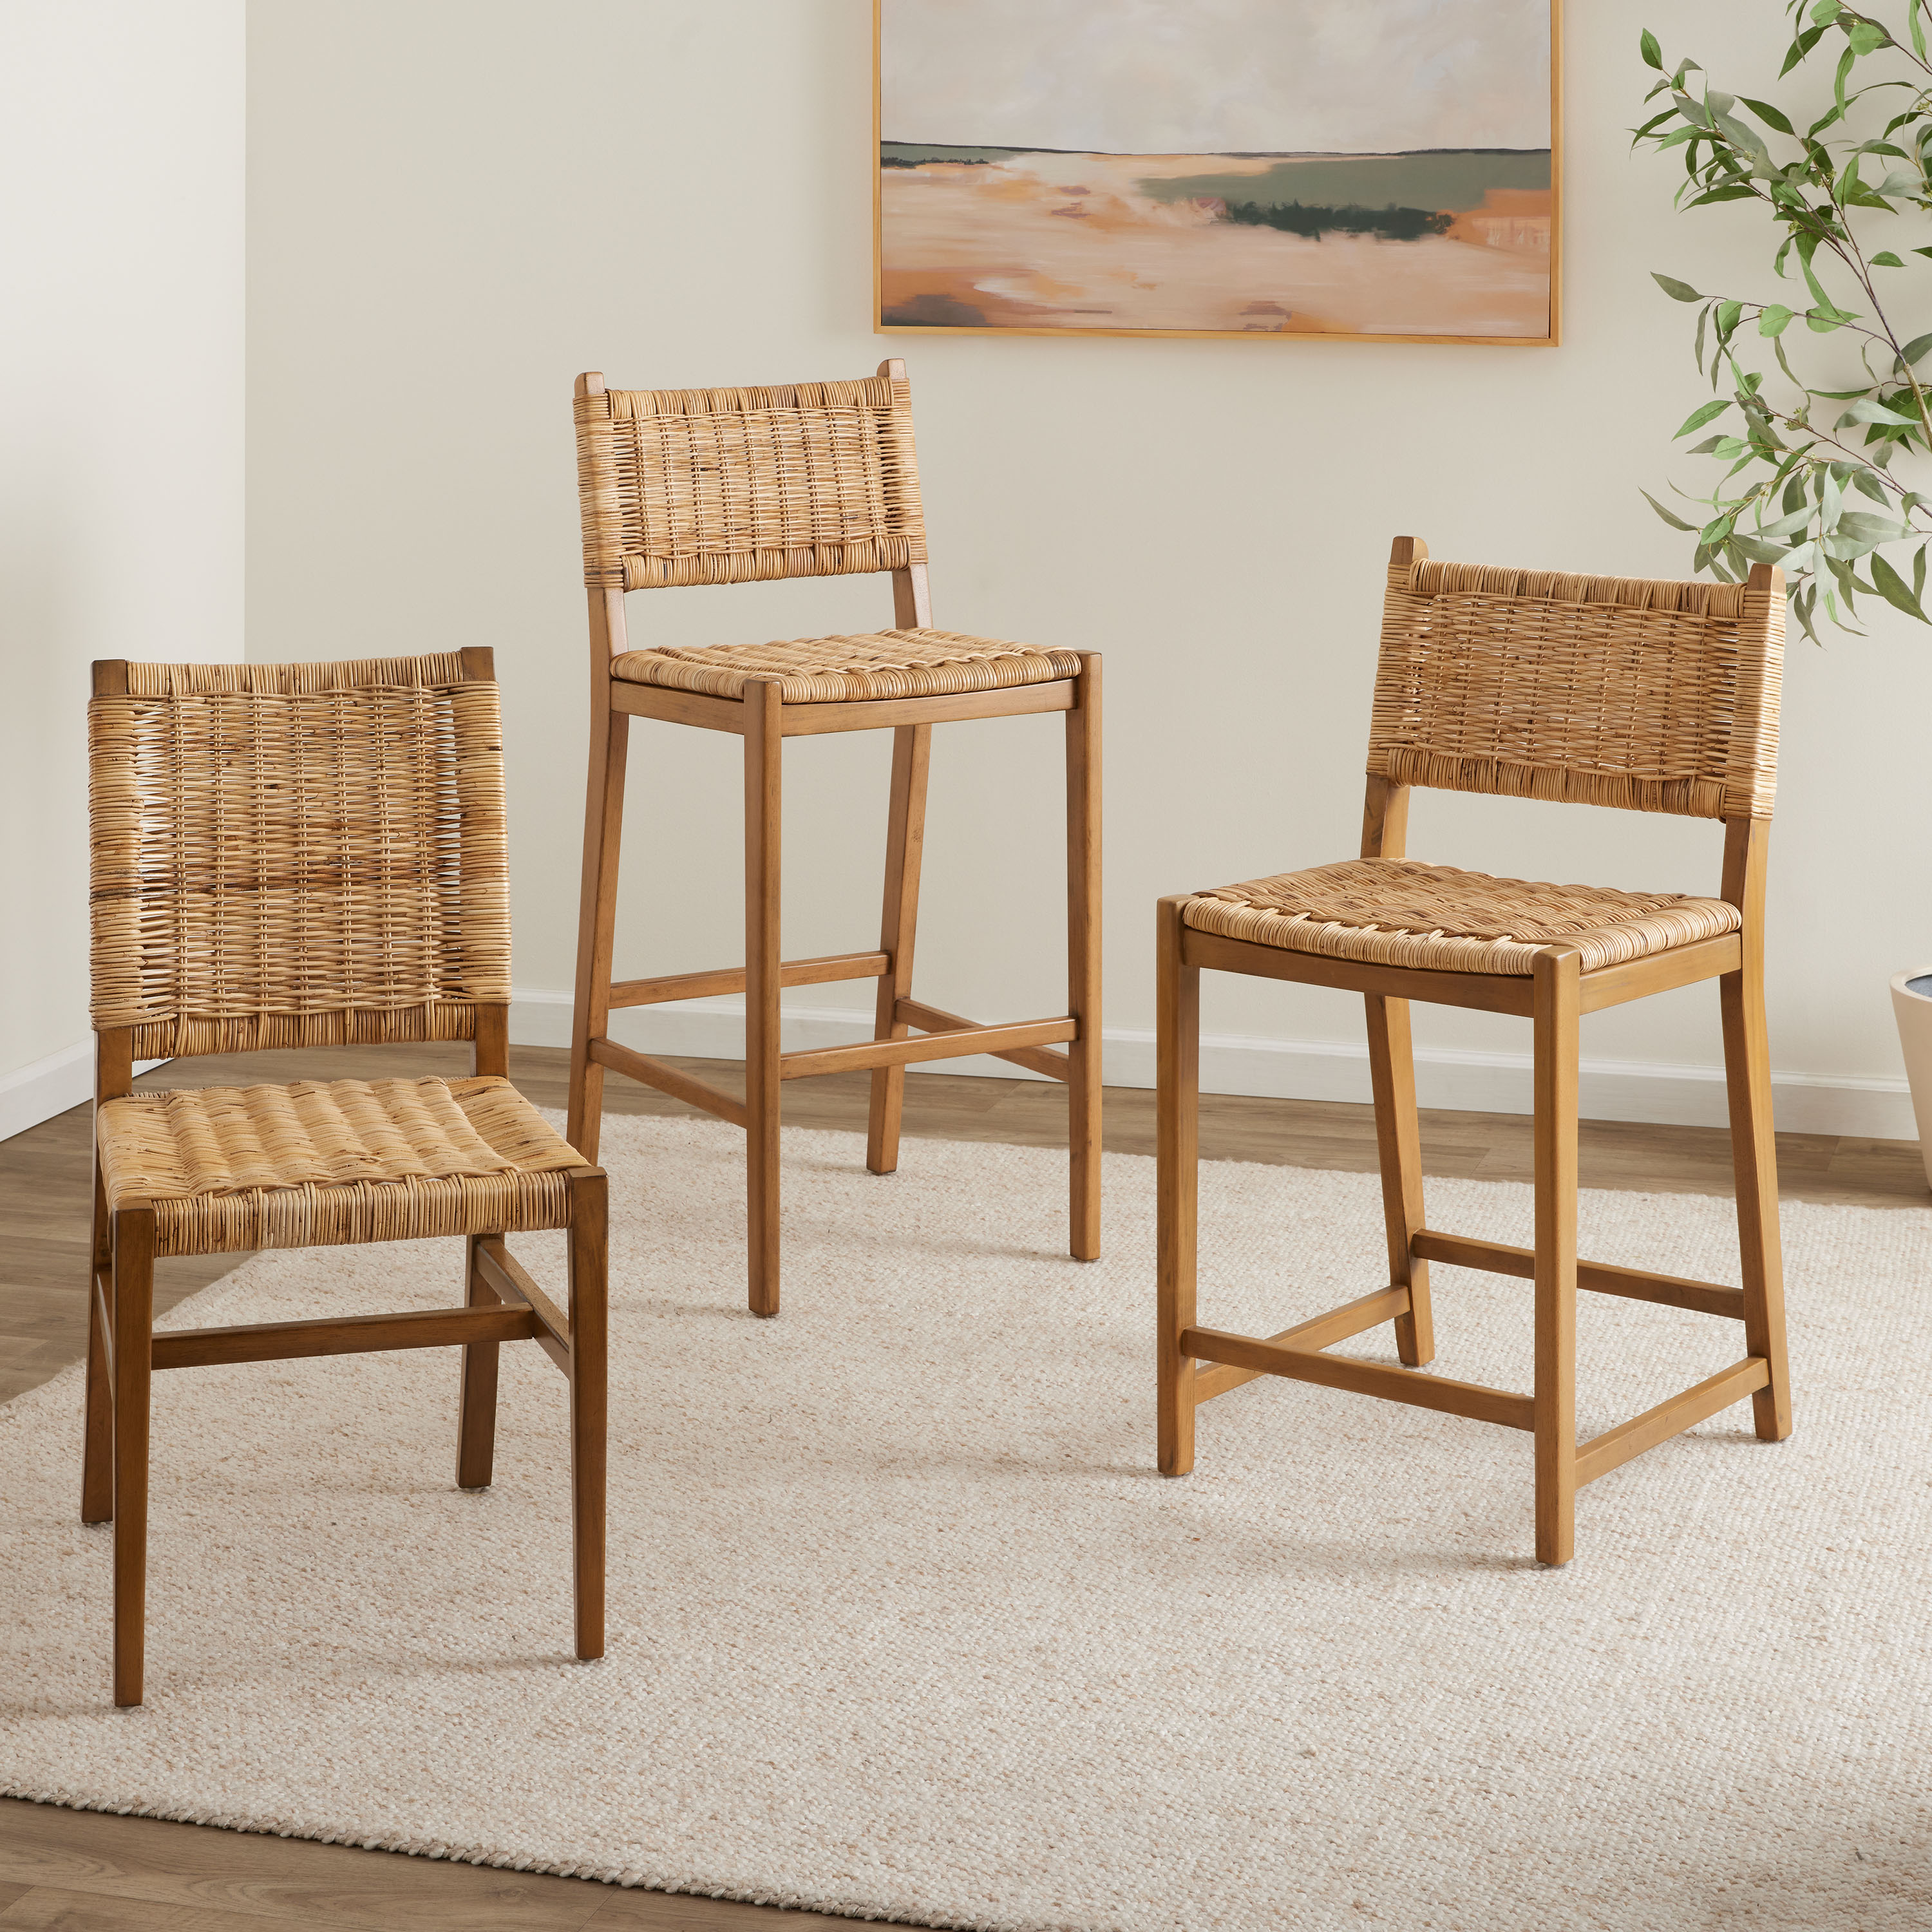 Amolea Vintage Acorn and Rattan Dining Seat Collection - World Market